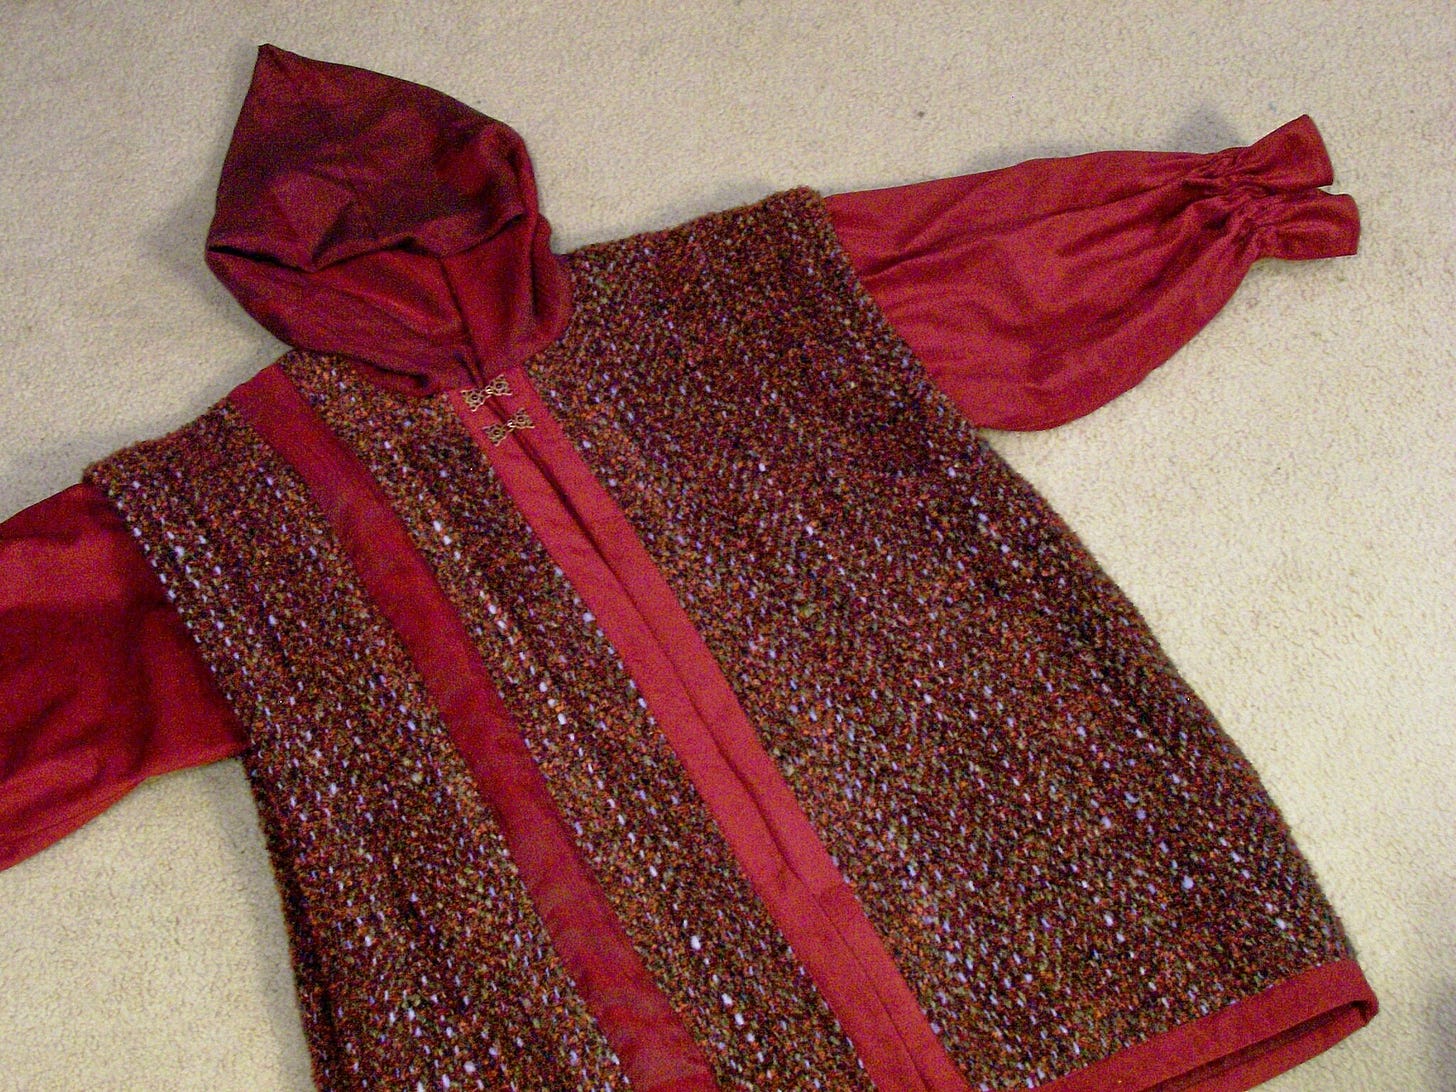 A jacket in shades of burgundy and grayish brown. The body is handwoven wool; the sleeves, hood, and trim are suedecloth.